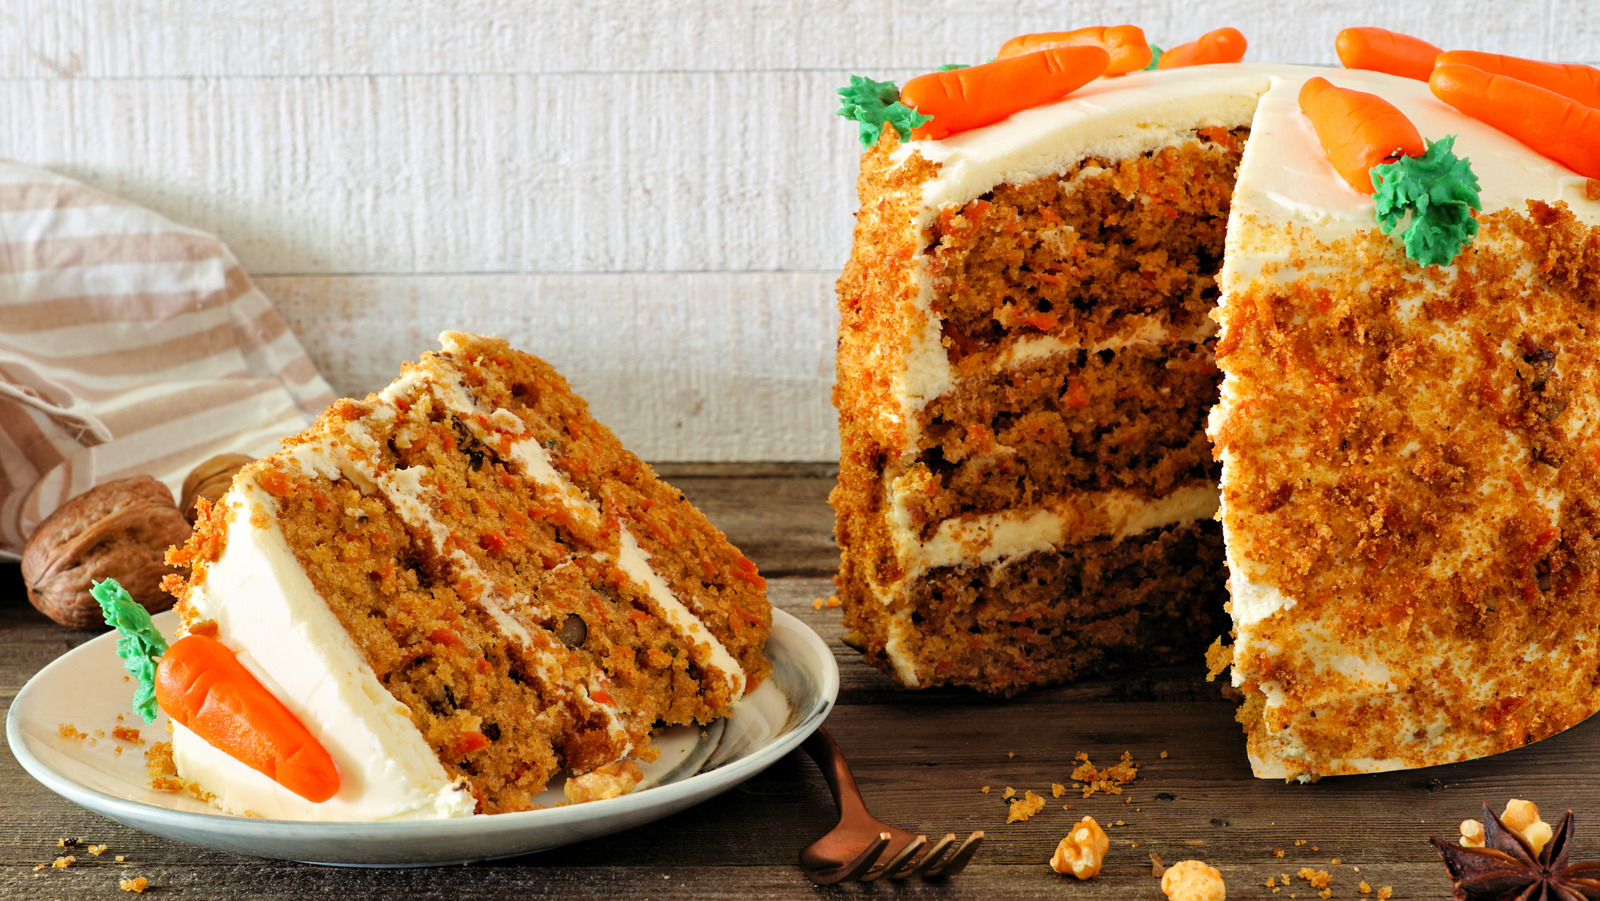 Best Carrot Cake with Raisins and Walnuts - Grumpy's Honeybunch